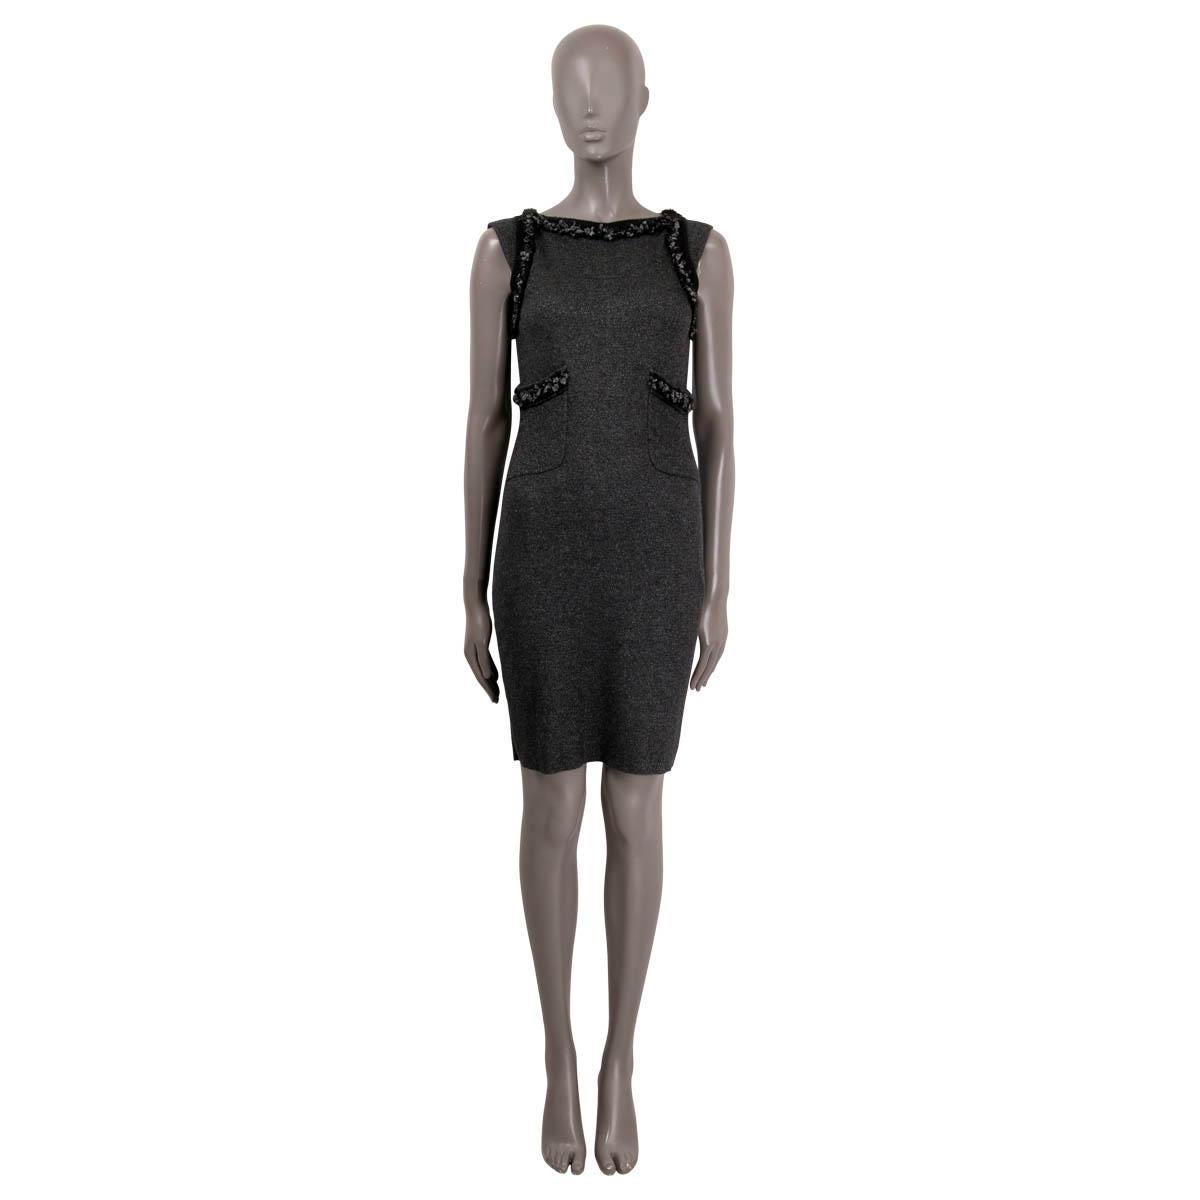 100% authentic Chanel sleeveless sheath dress in grey cashmere (73%), polyester (14%) and silk (13%) with silver lurex. Features a black and silver frill trim, CC button and two open pockets on the front. Has been worn and is in excellent